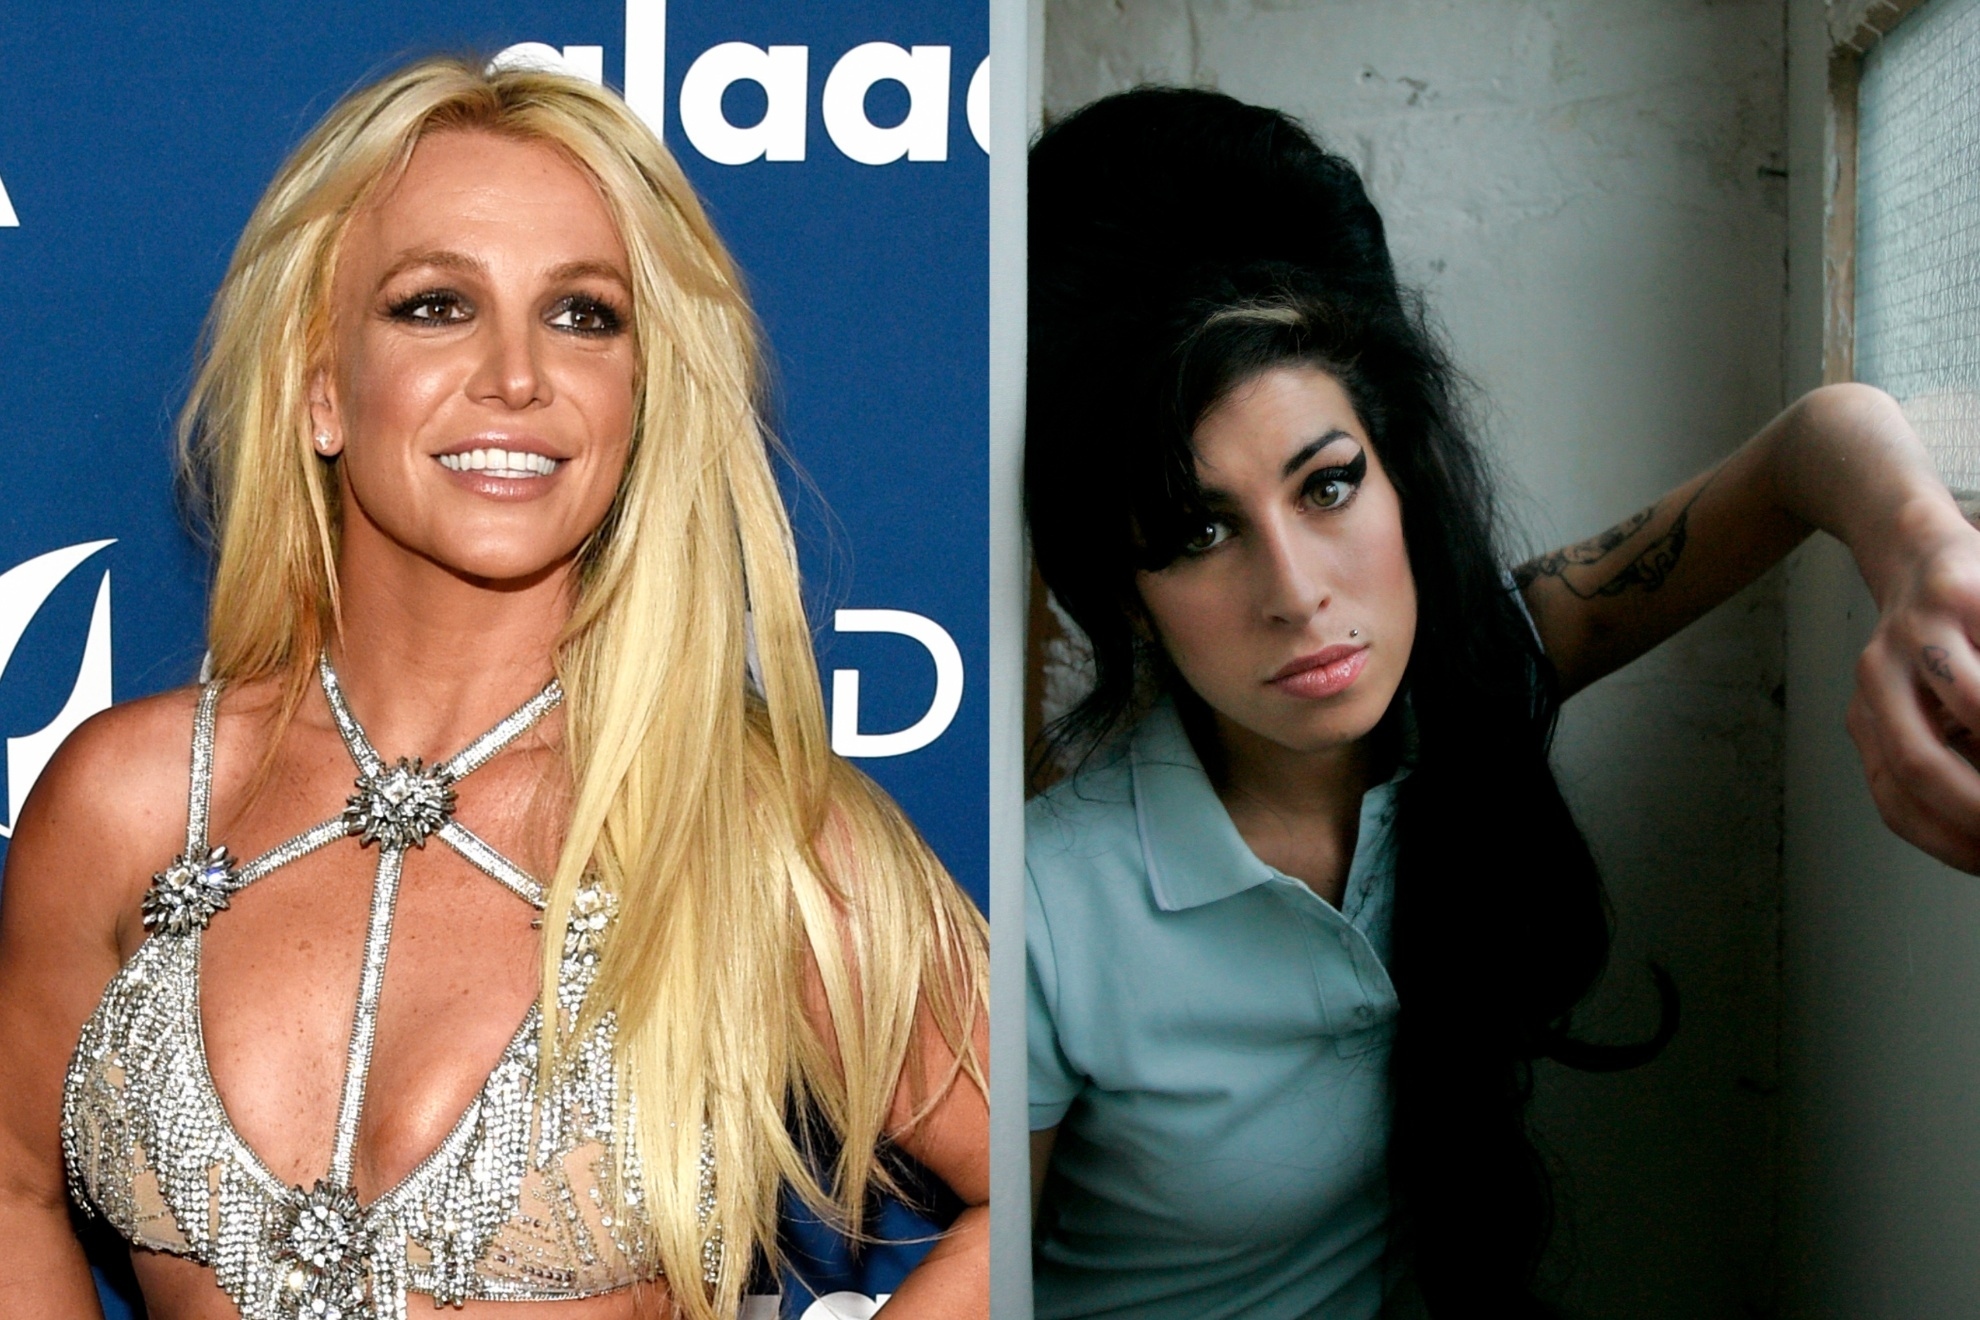 Mashup image of Britney Spears and Amy Winehouse